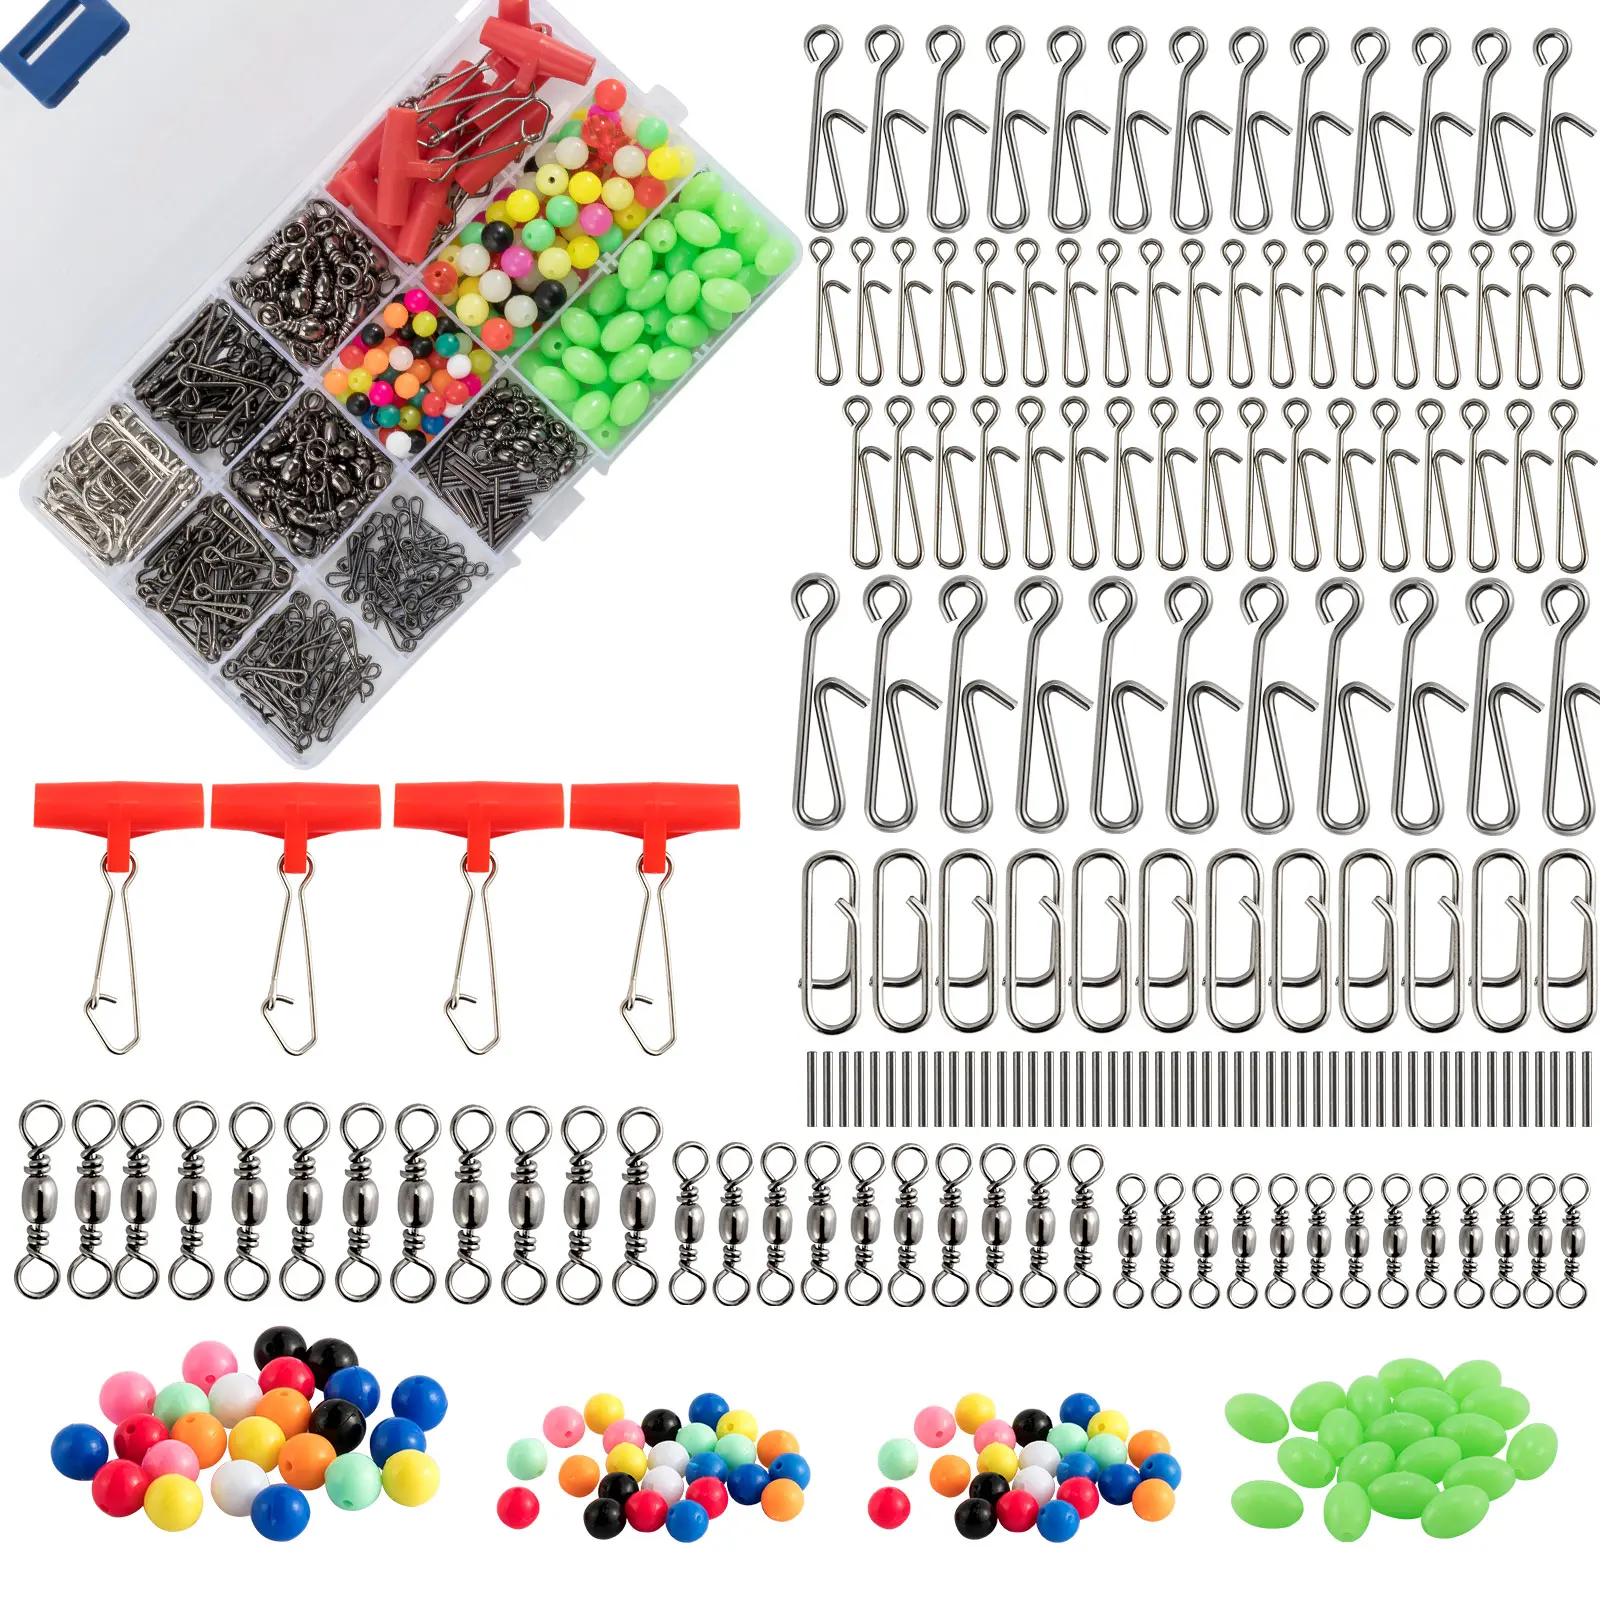 

465pcs Carp Fishing Tackle Accessories Kit Box Saltwater Fishing Swivel Quick Change Snaps Fast Link Clips Fishing Beads